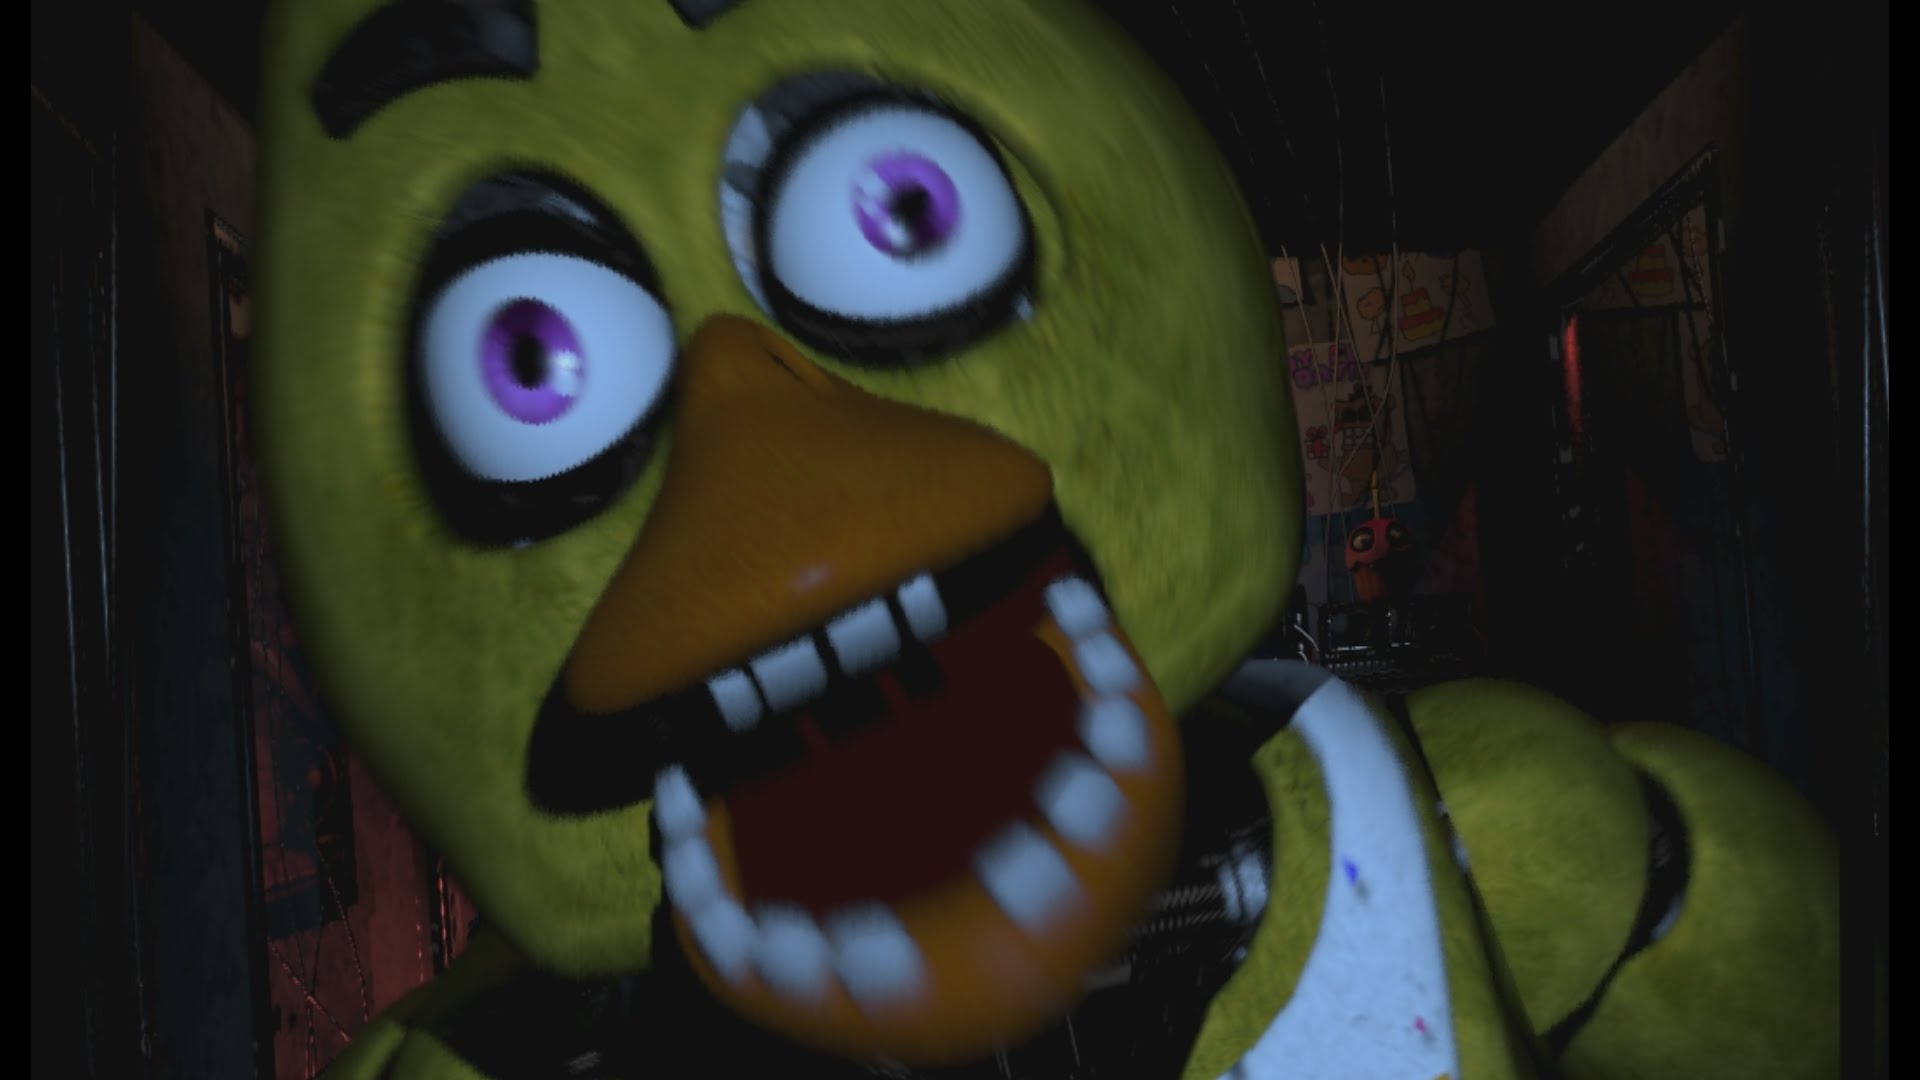 WORST JUMPSCARE IVE EVER HAD   Five Nights at Freddys   Part 4 1920x1080